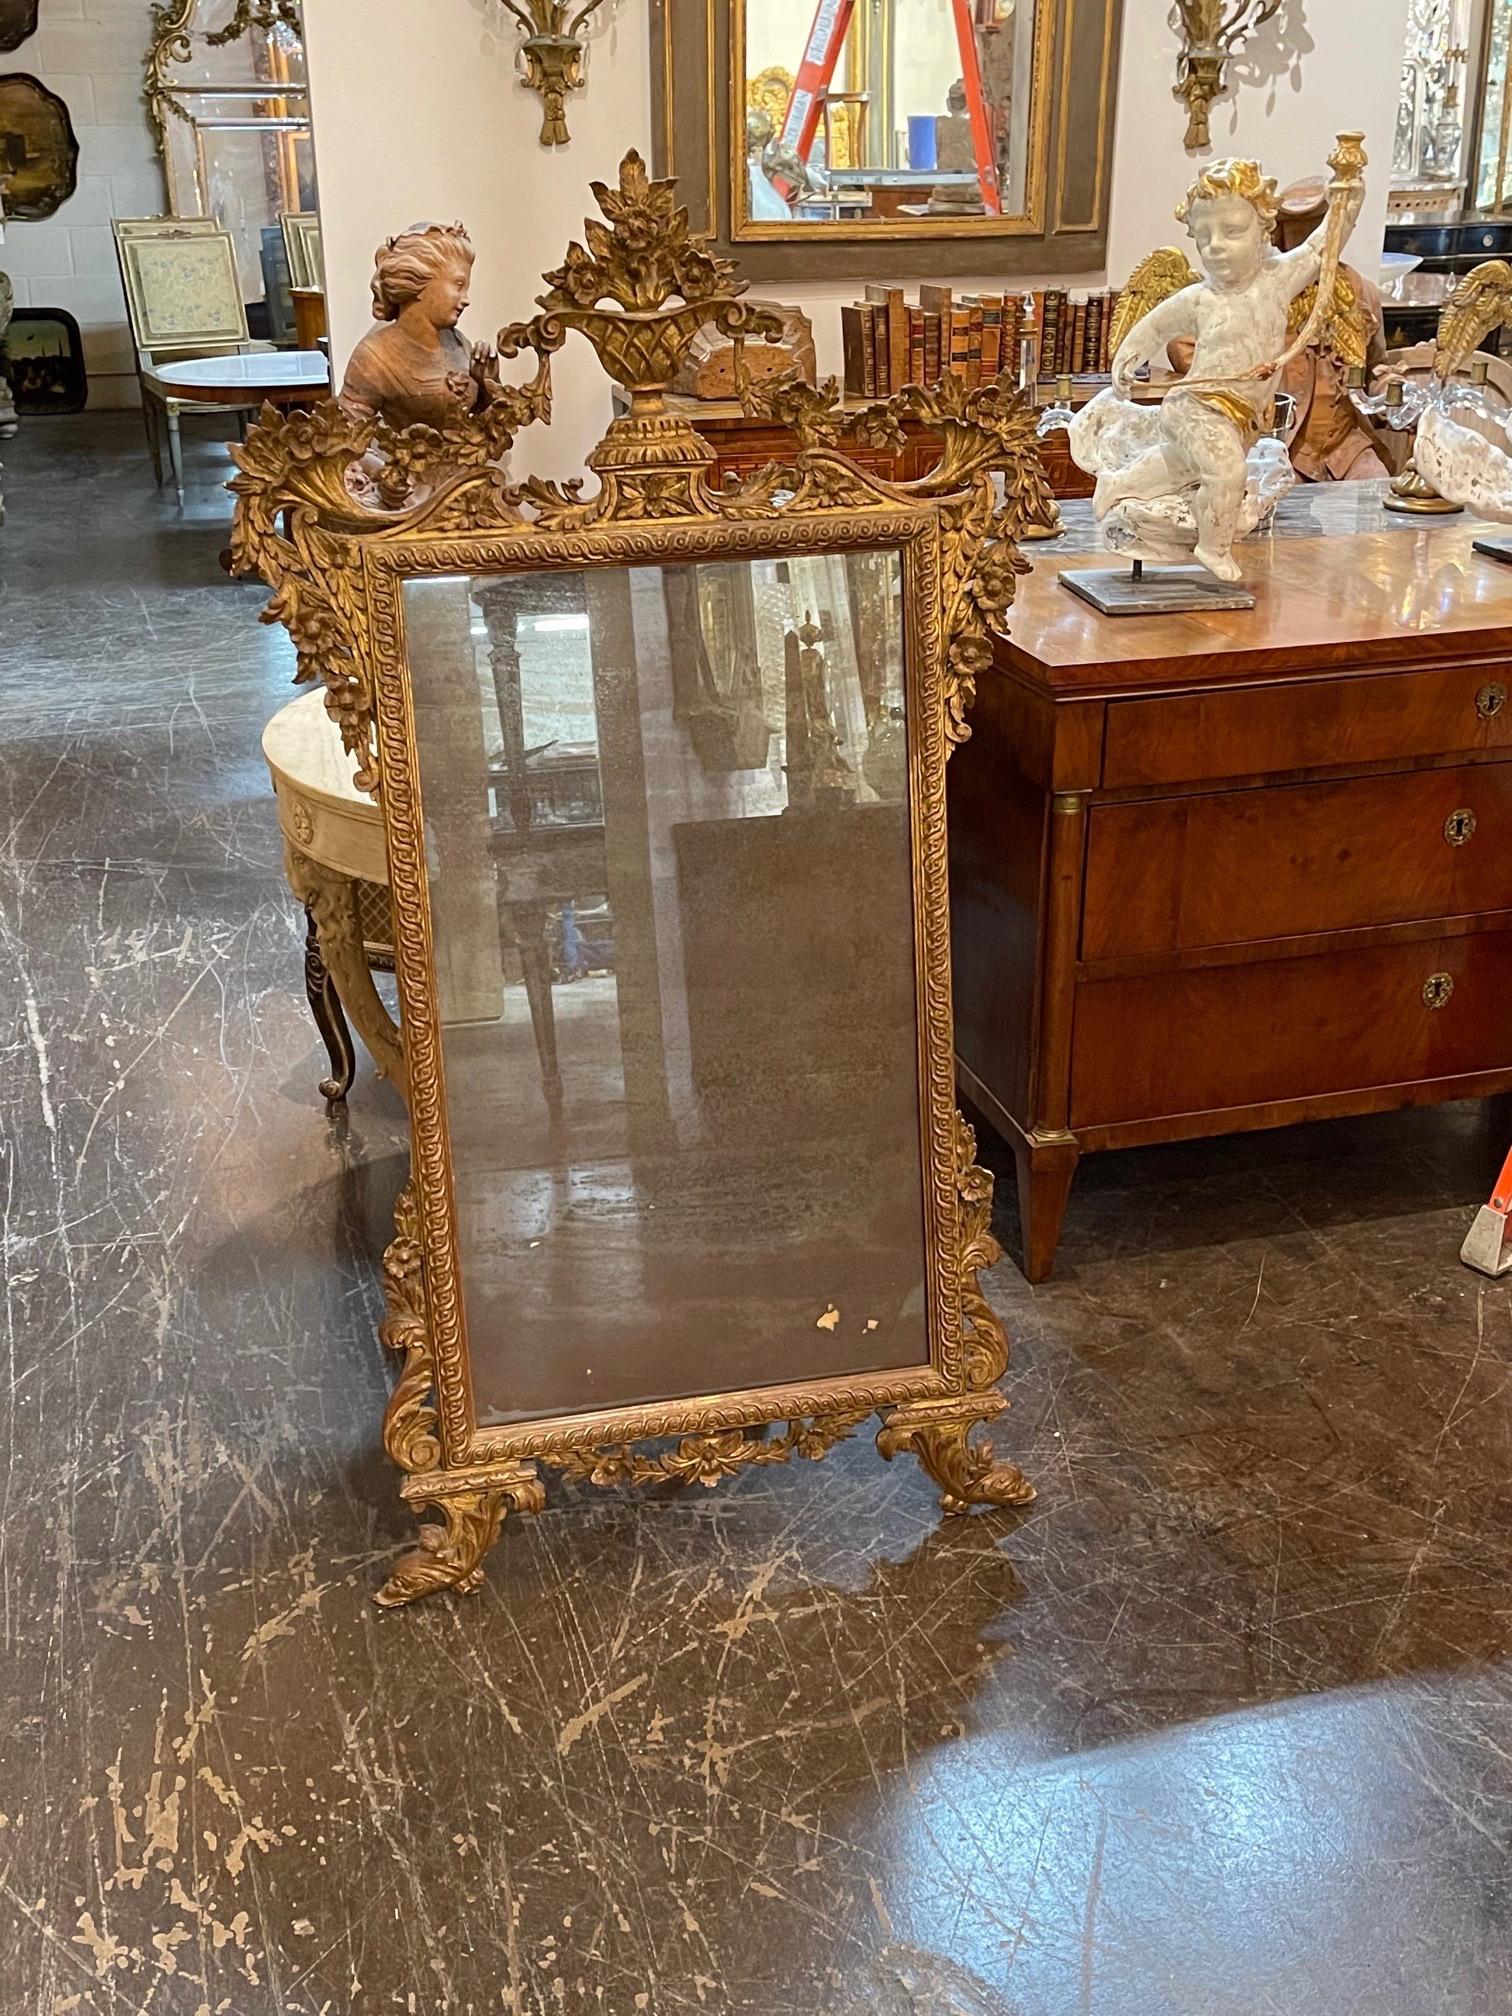 Beautiful 19th century Italian carved and giltwood mirror. Very fine carving including an urn with overflowing flowers. Lovely!!